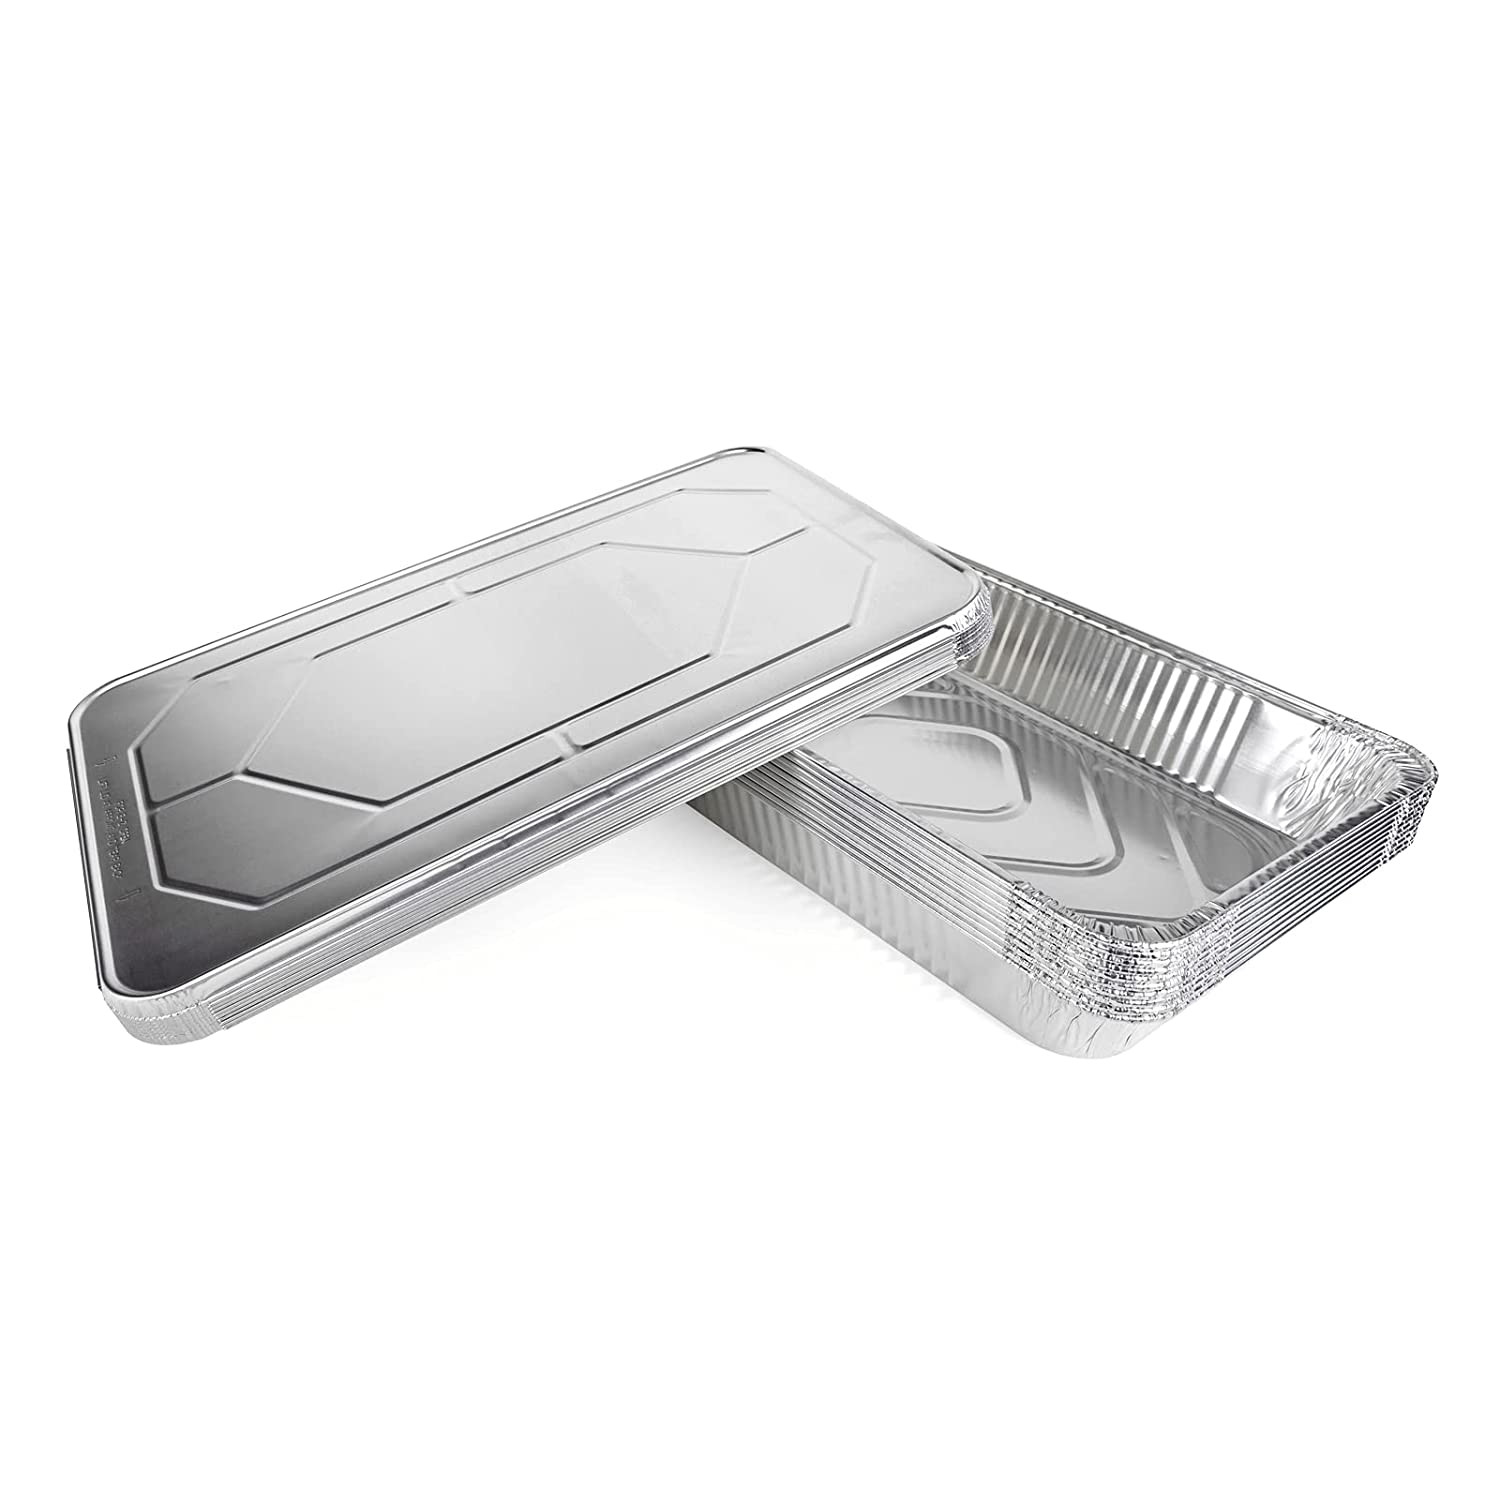 https://idlpack.com/image/cache/catalog/Products/Foil%20Pans%20and%20Trays/2deep-1500x1500.jpg